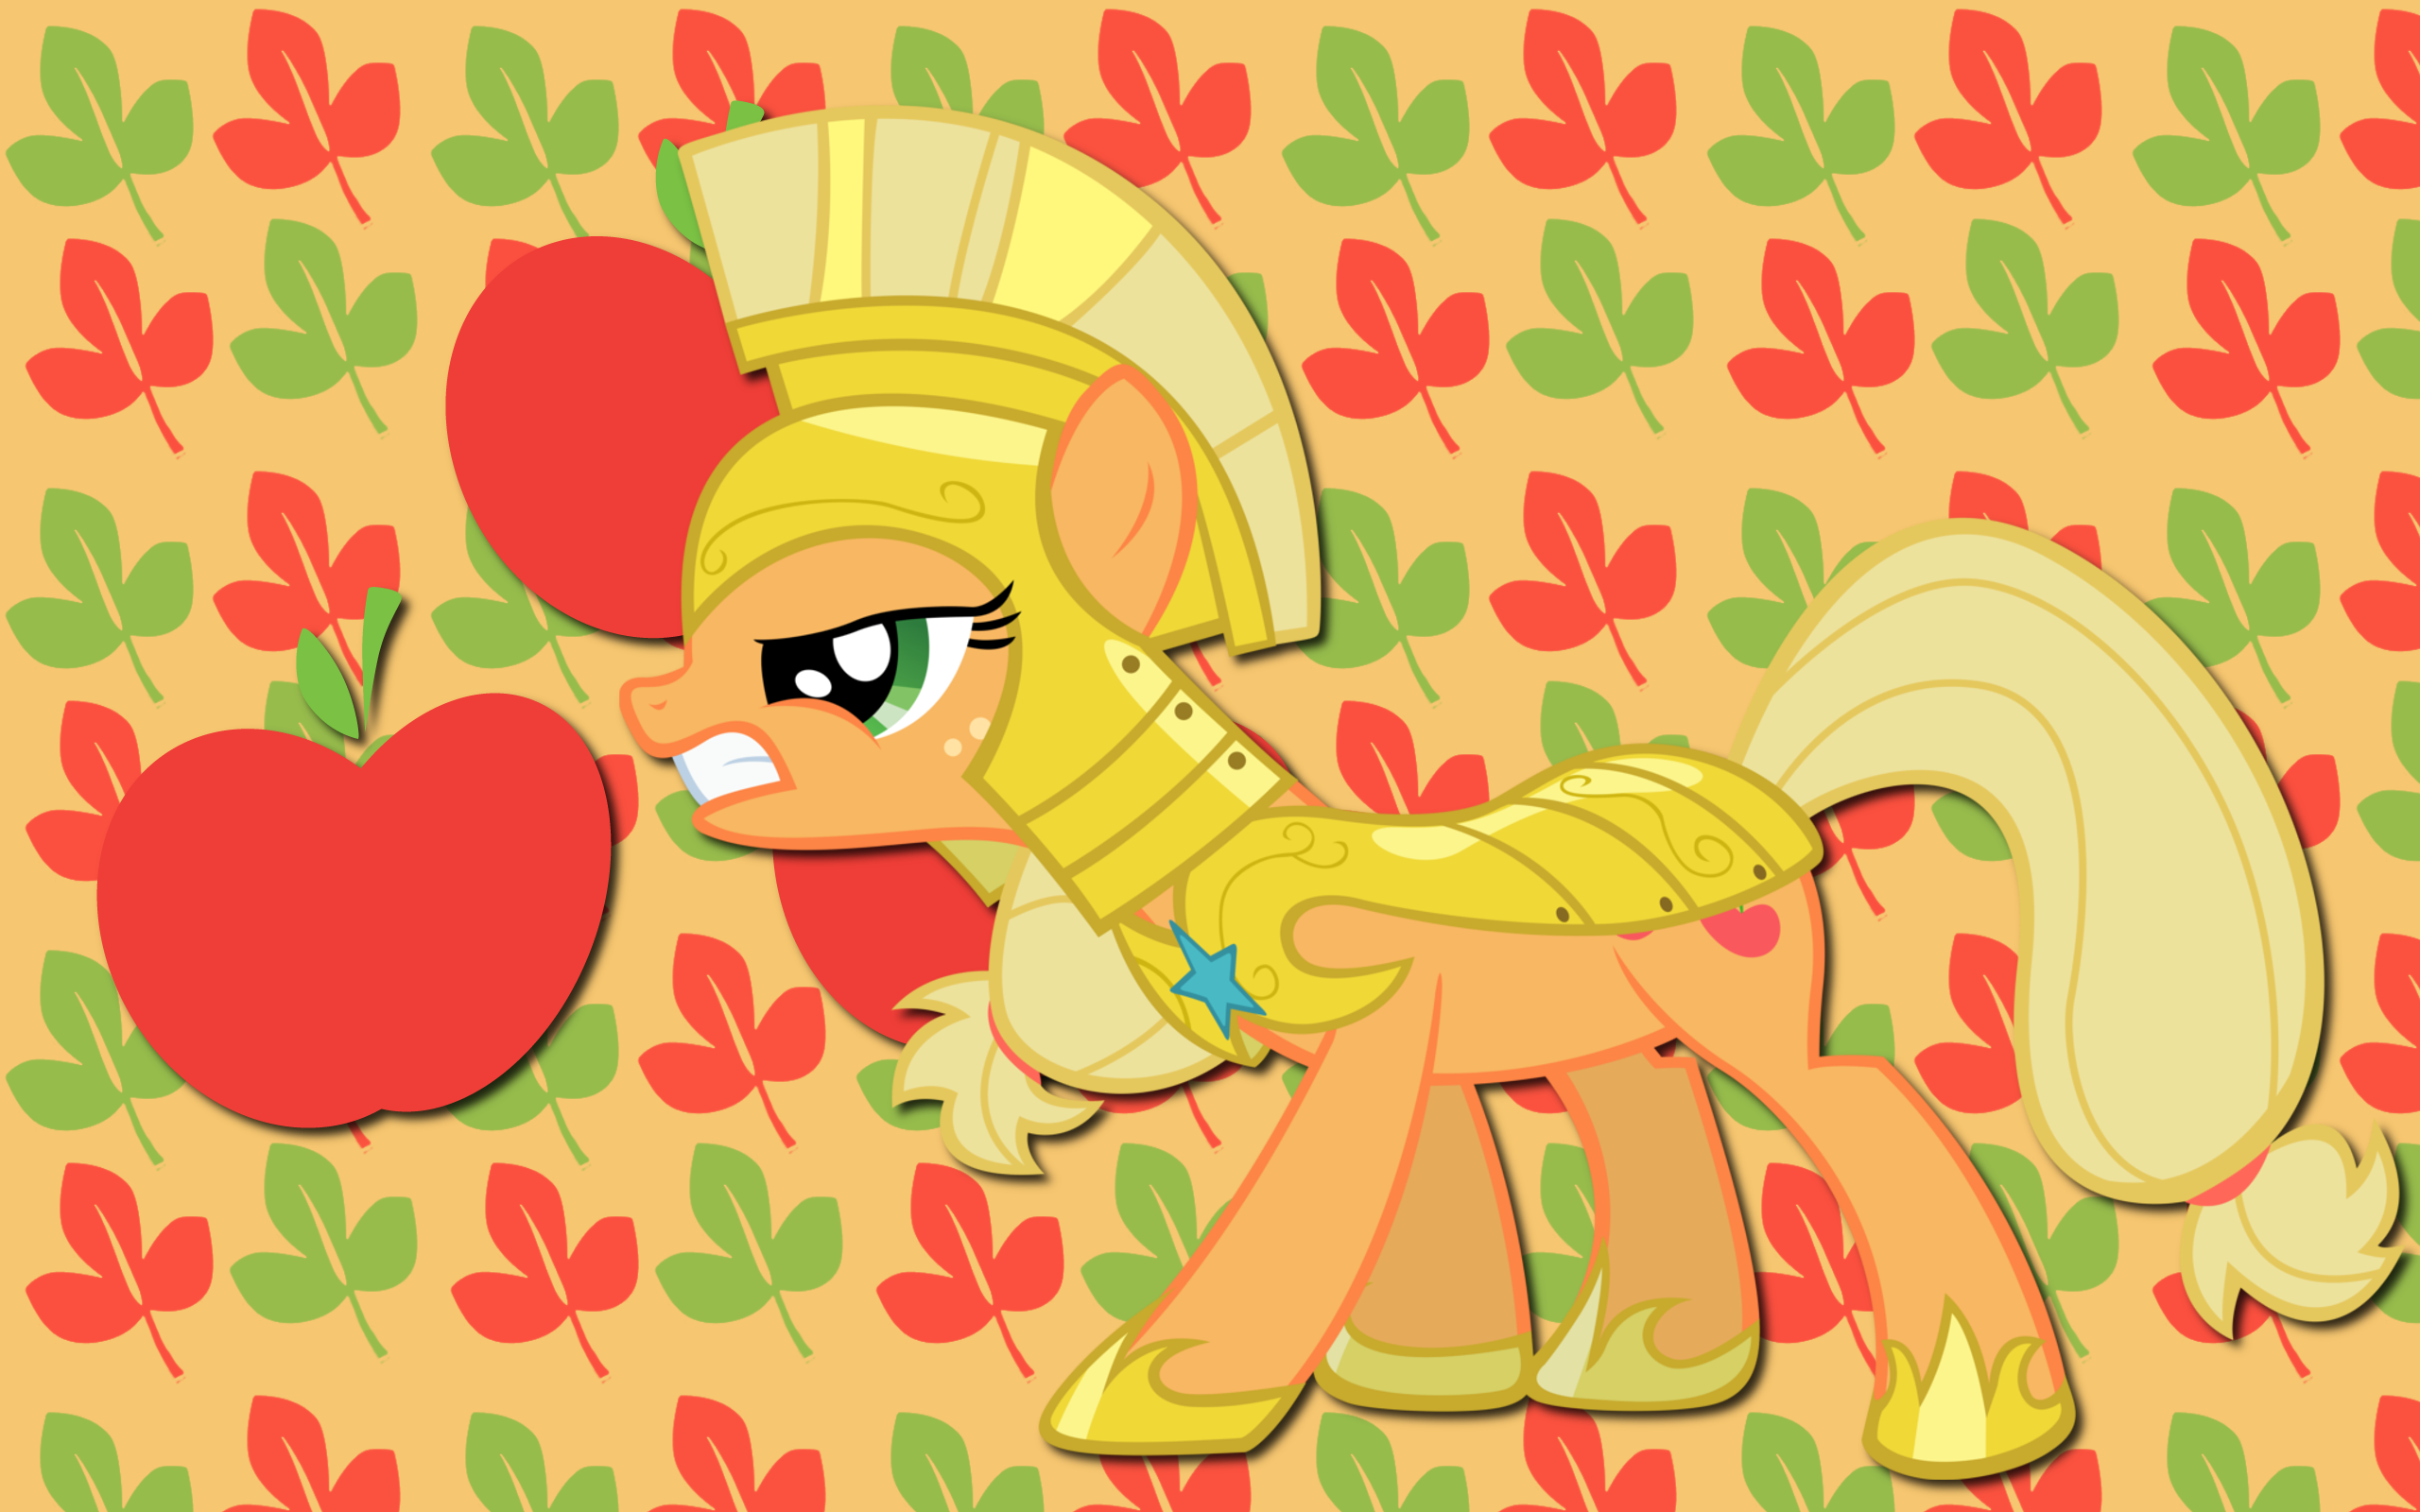 Guard Apple Jack WP by AliceHumanSacrifice0, ooklah and Spaceponies